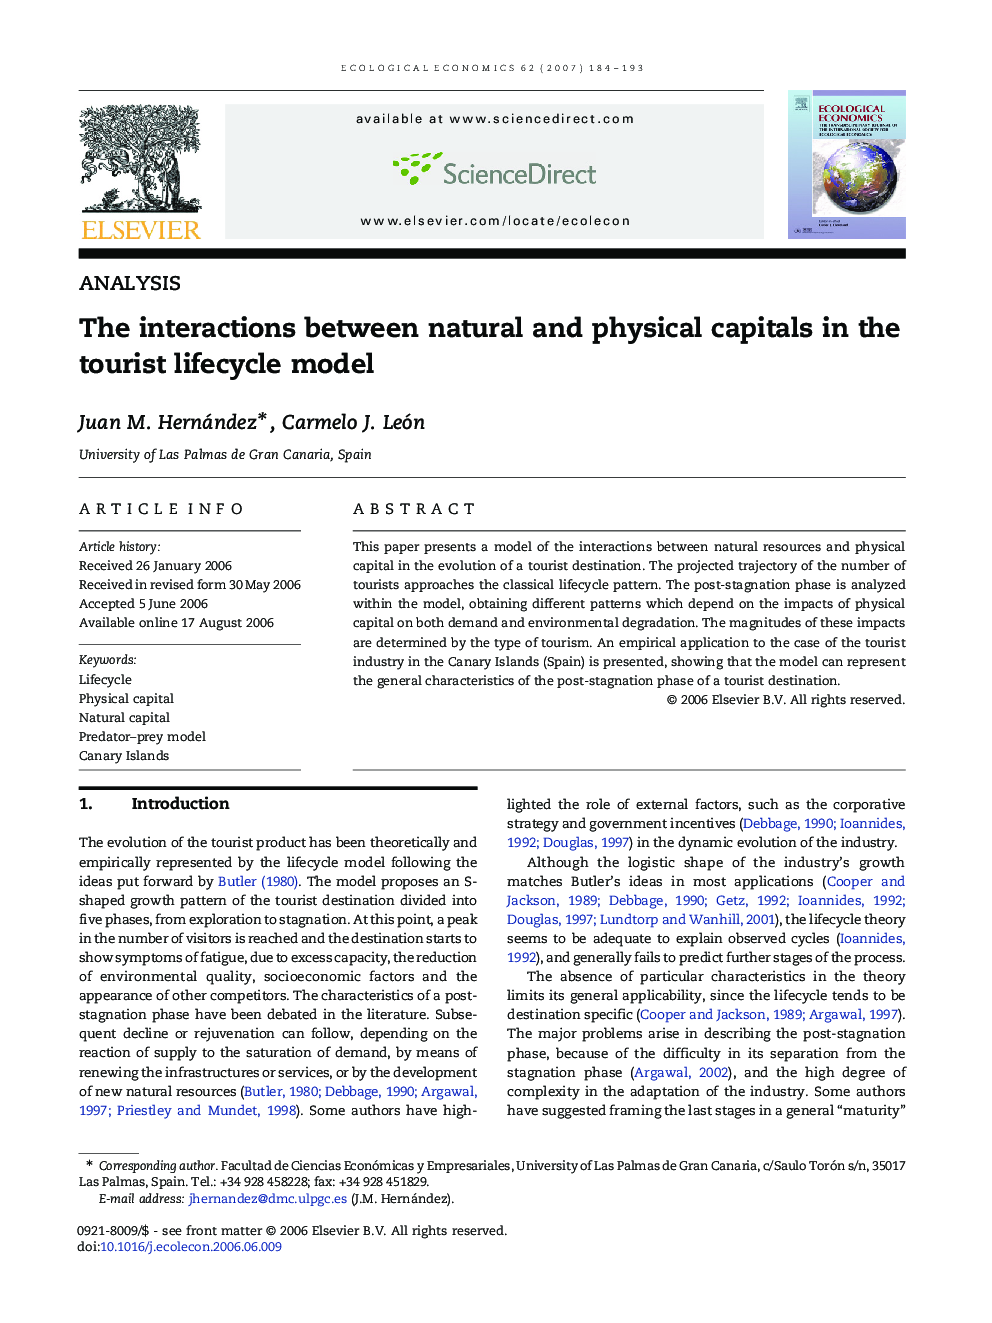 The interactions between natural and physical capitals in the tourist lifecycle model